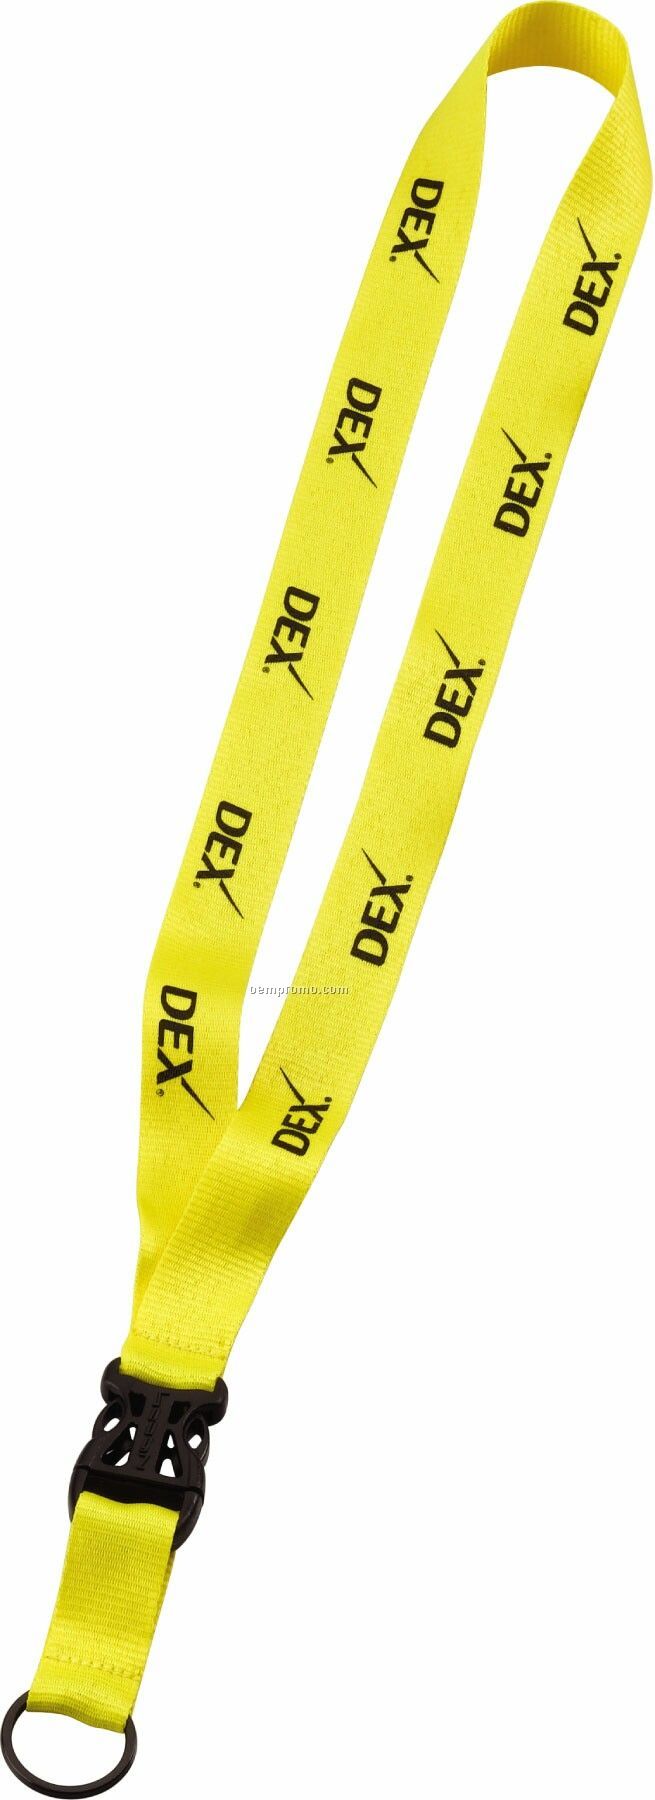 3/4" Polyester Snap Buckle Release Lanyard W/ Split-ring (Same Day Service)